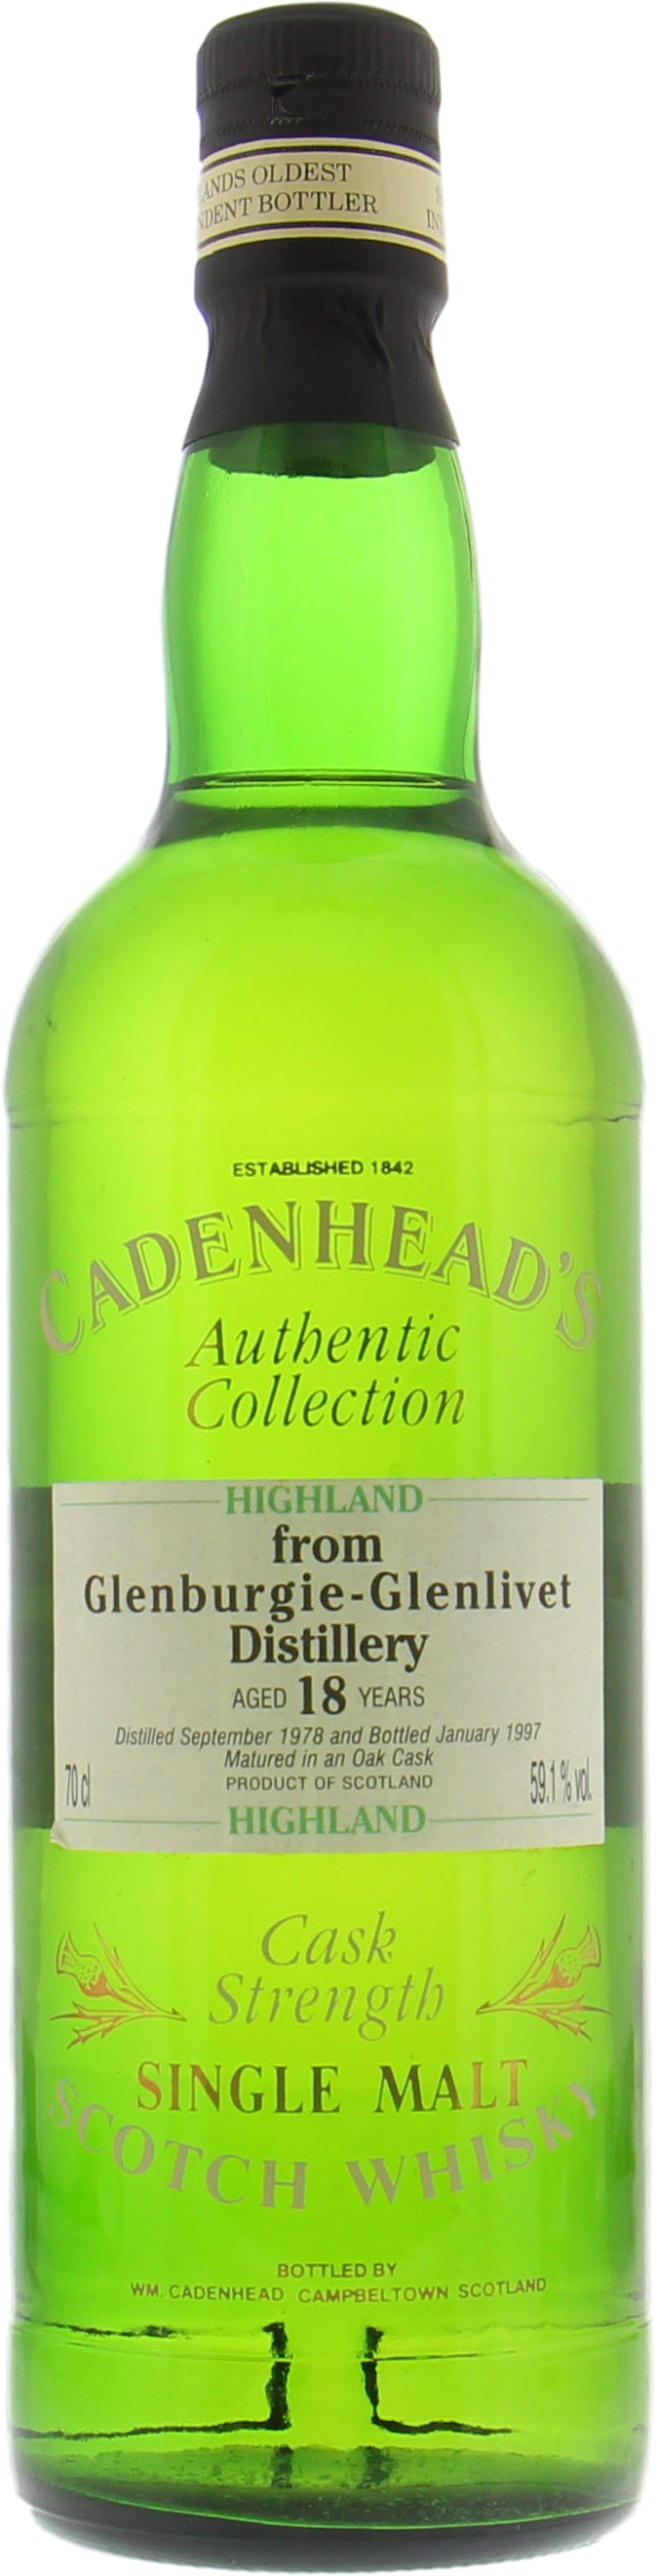 Glenburgie - 18 Years Old Cadenhead Authentic Collection 59.1% 1978